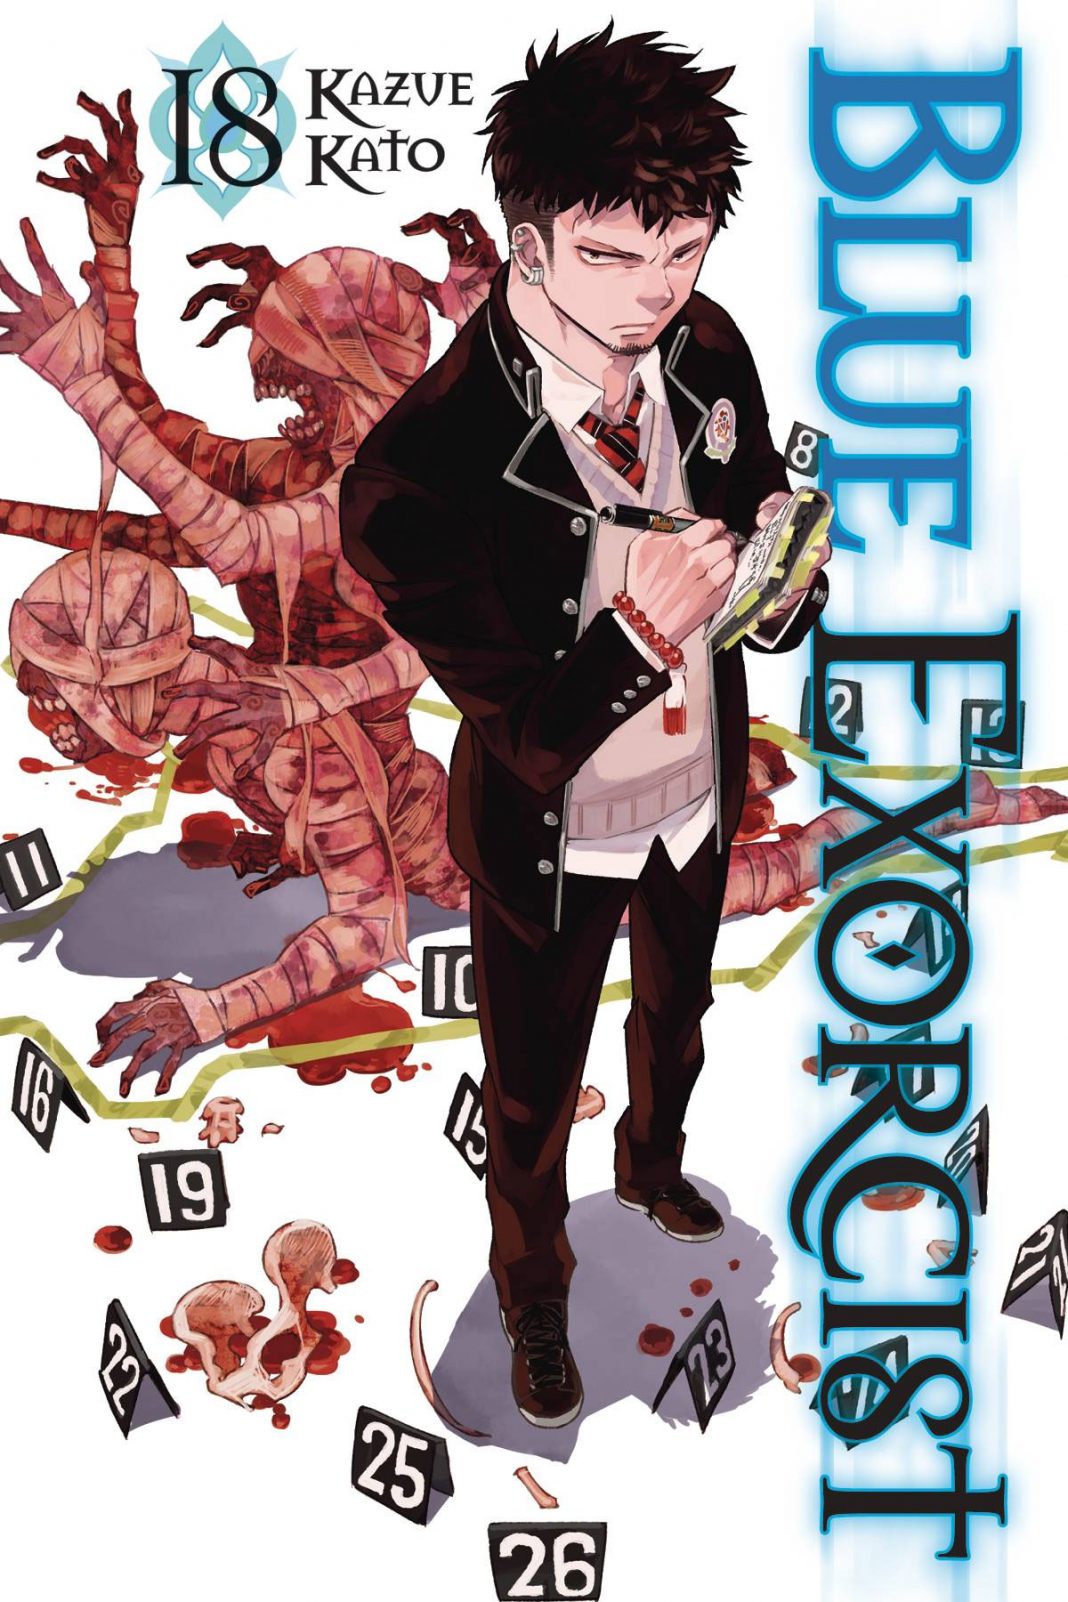 Blue Exorcist Chapter 132 Release Date, Plot And Where To Watch Online